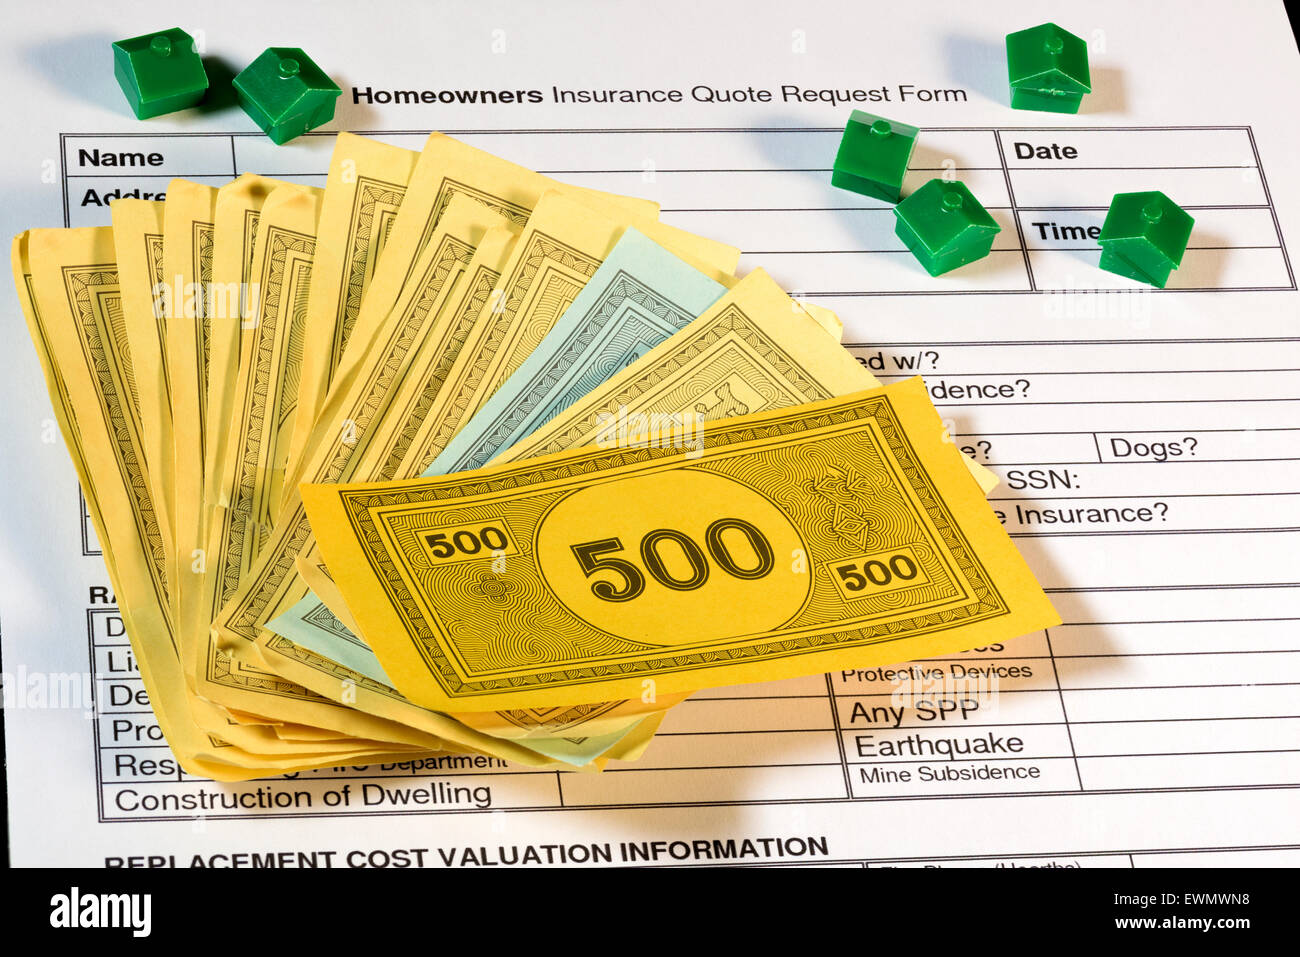 Homeowners insurance quote form with houses and money Stock Photo